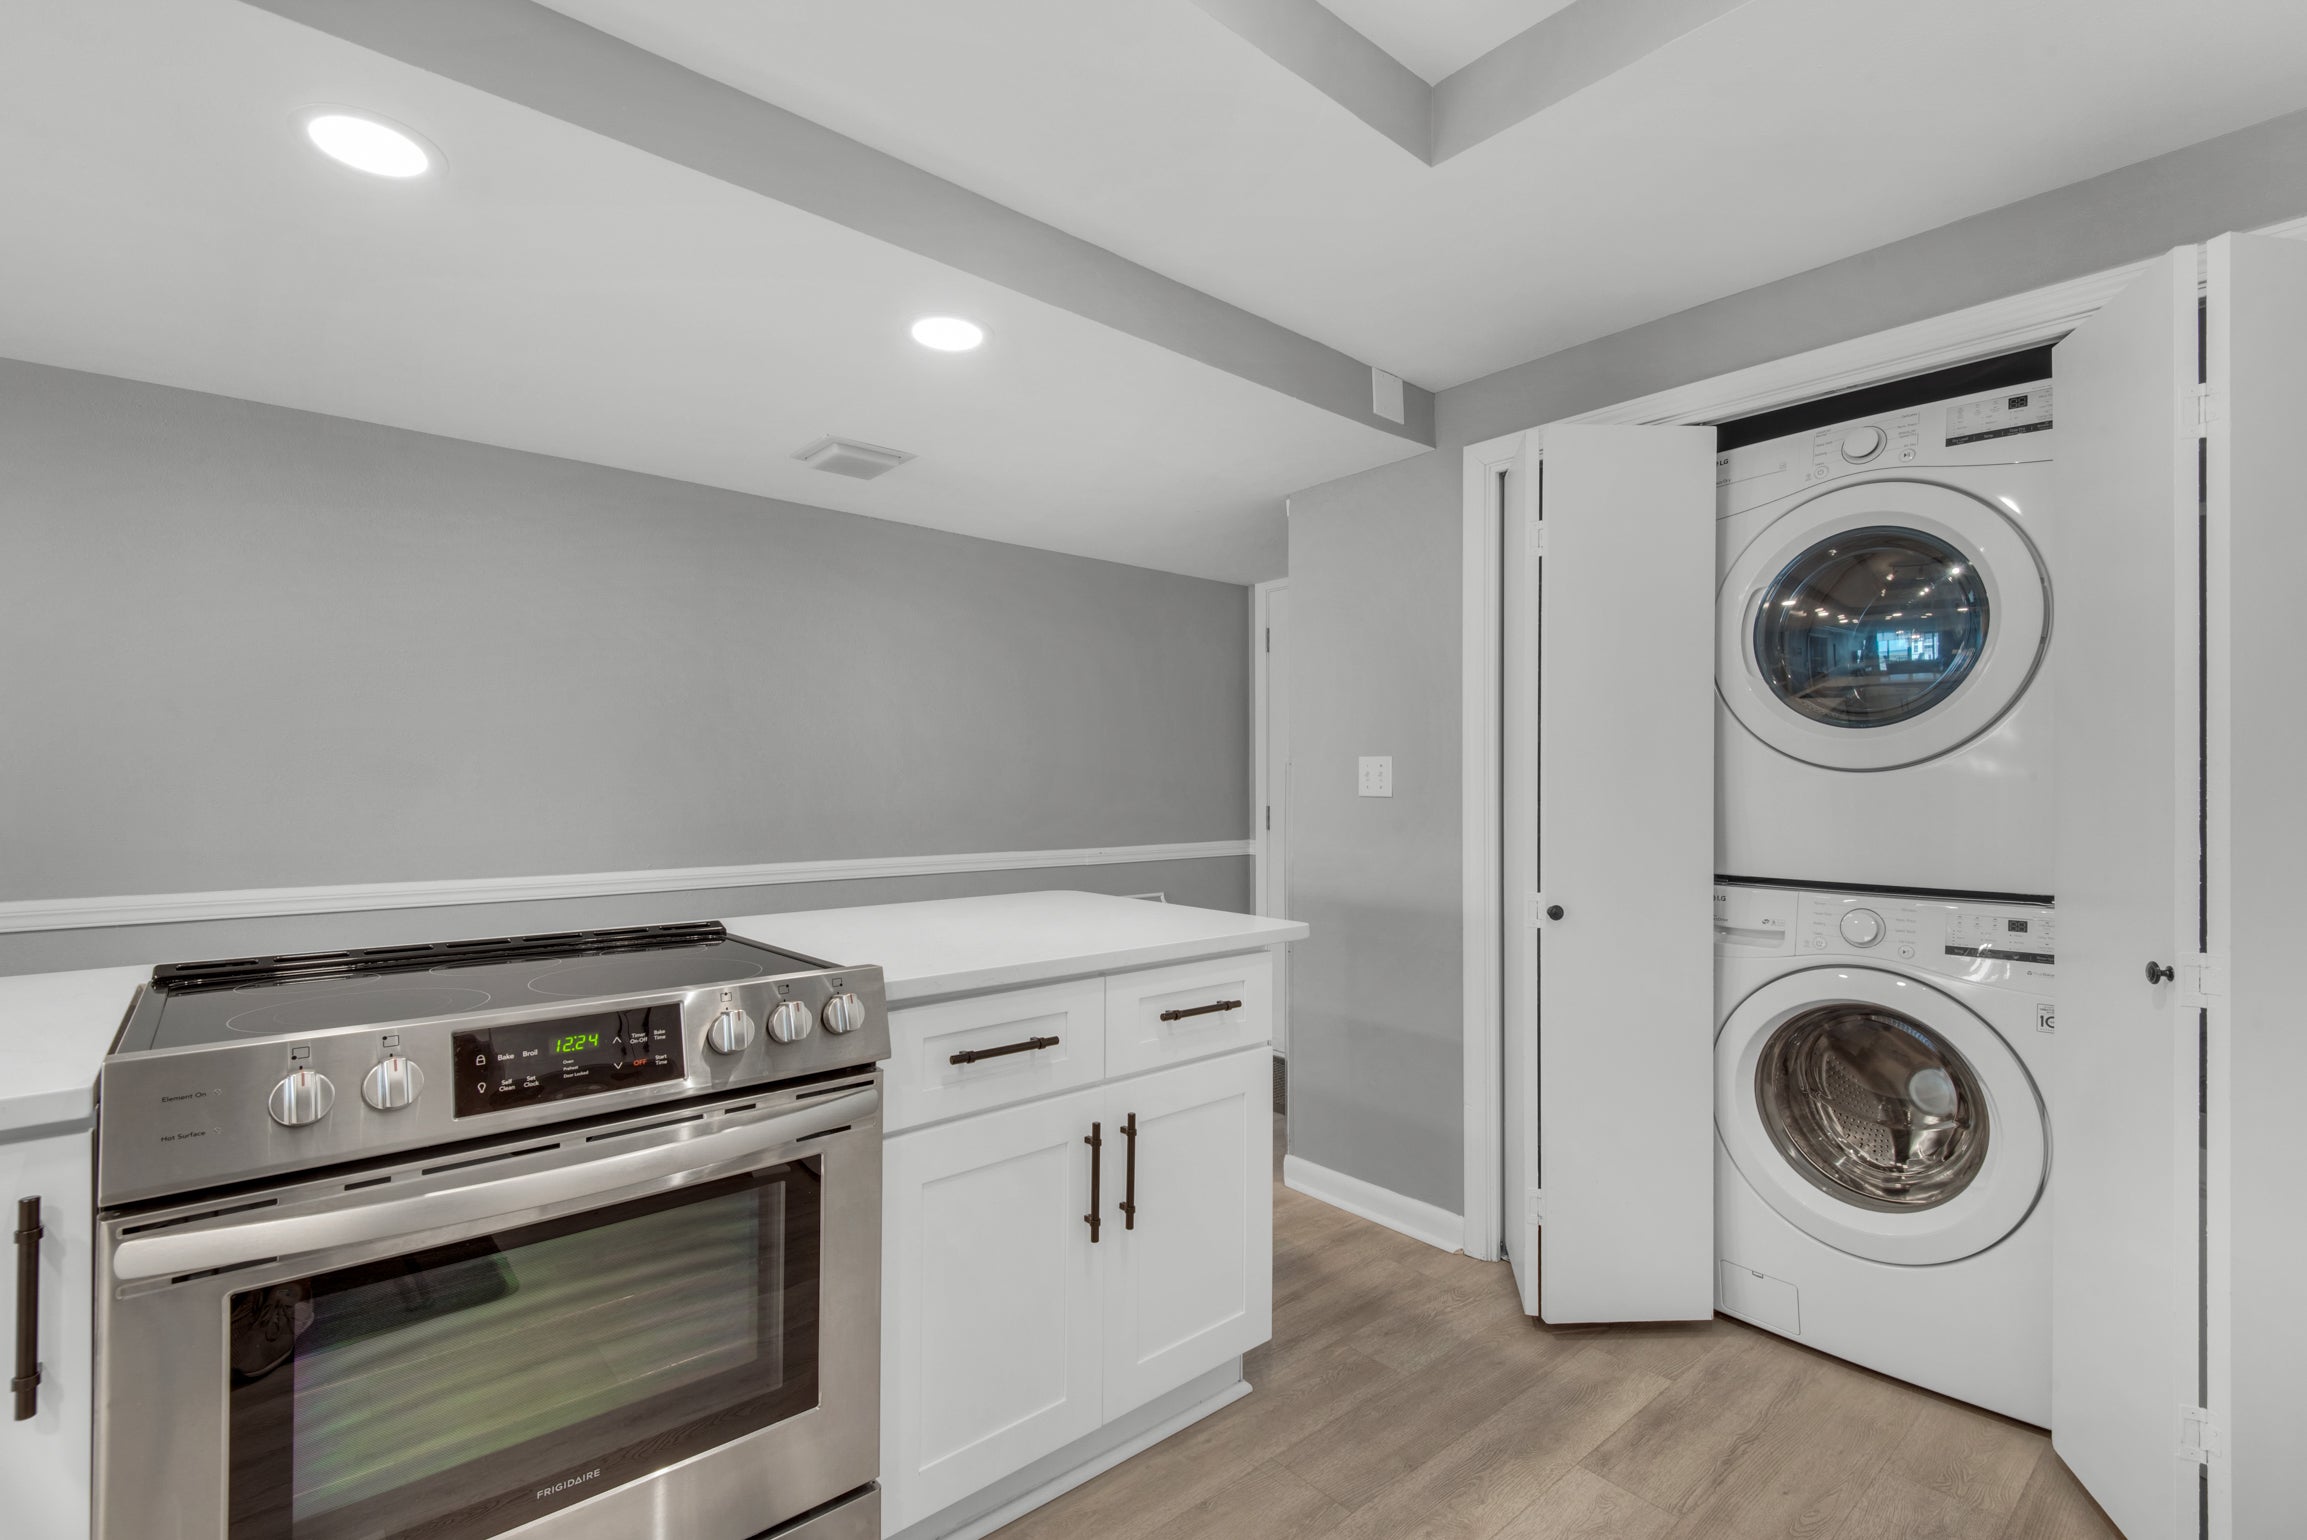 Washer and dryer in the kitchen space